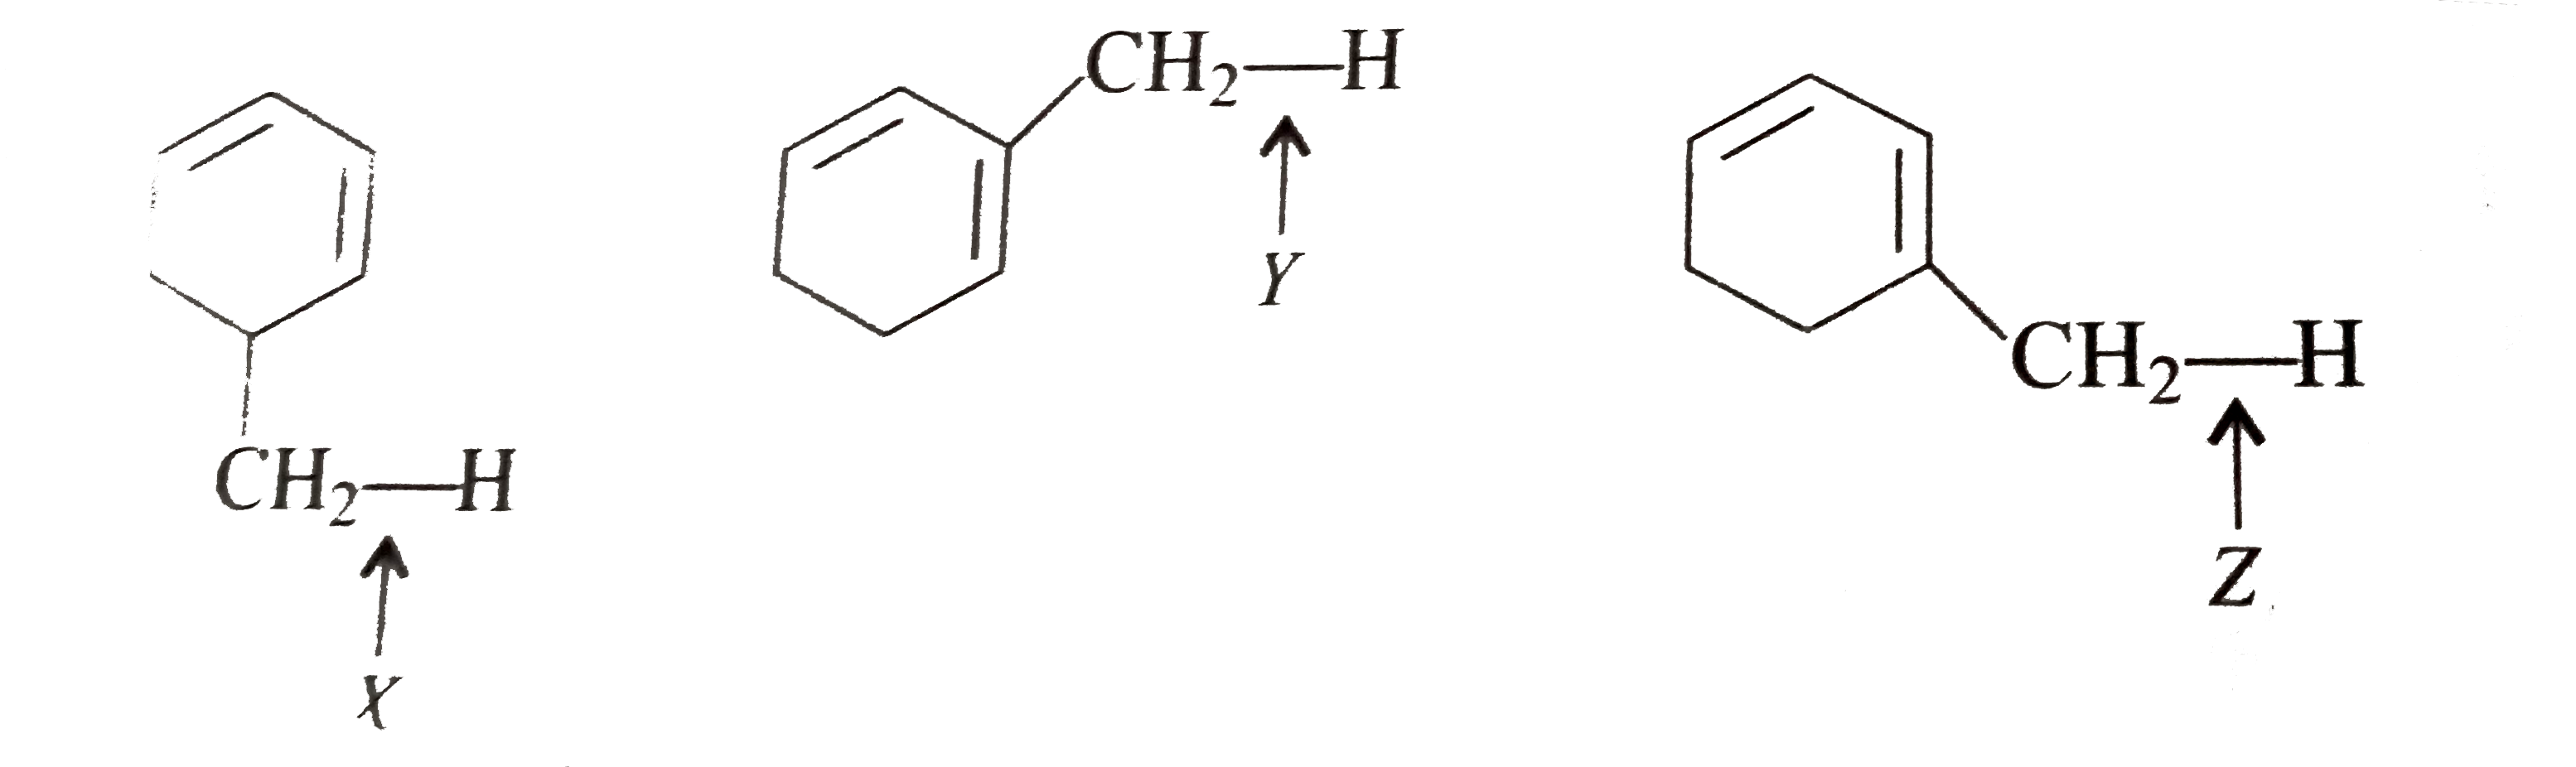 Which of the following is the correct order for bond energy for C-H bonds in these compounds?